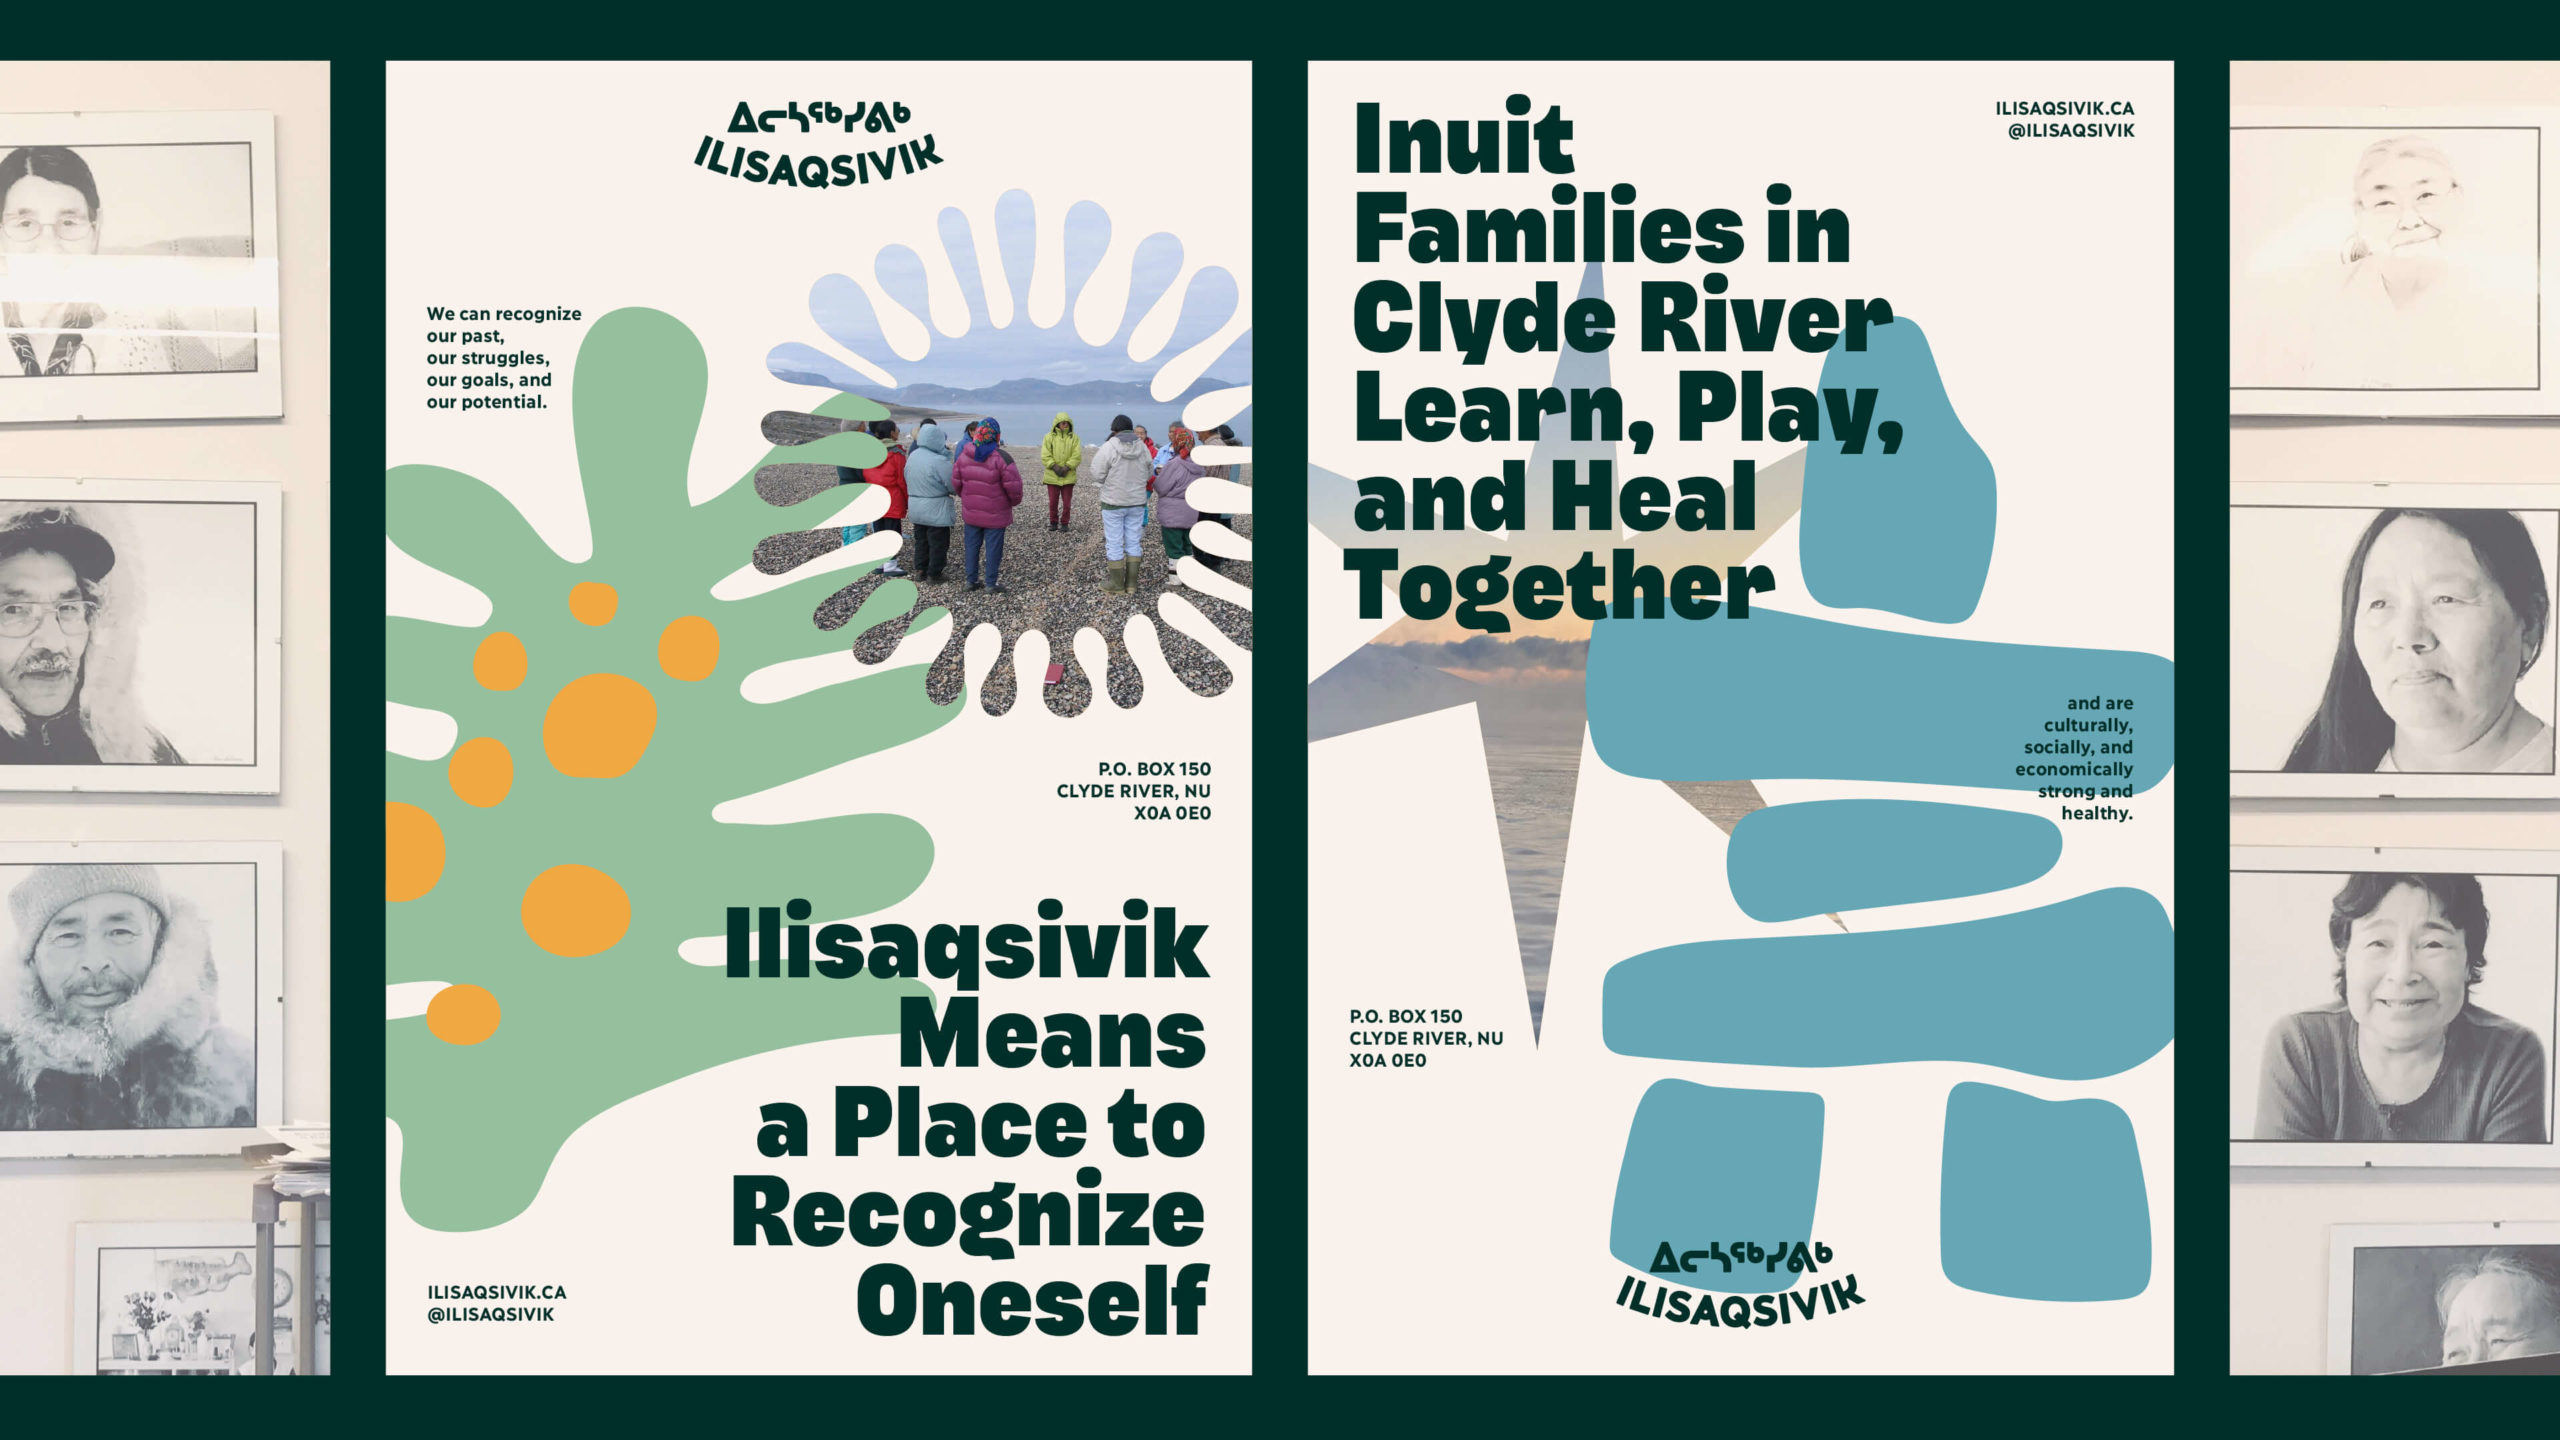 Ilisaqsivik: A Place to Recognize Oneself